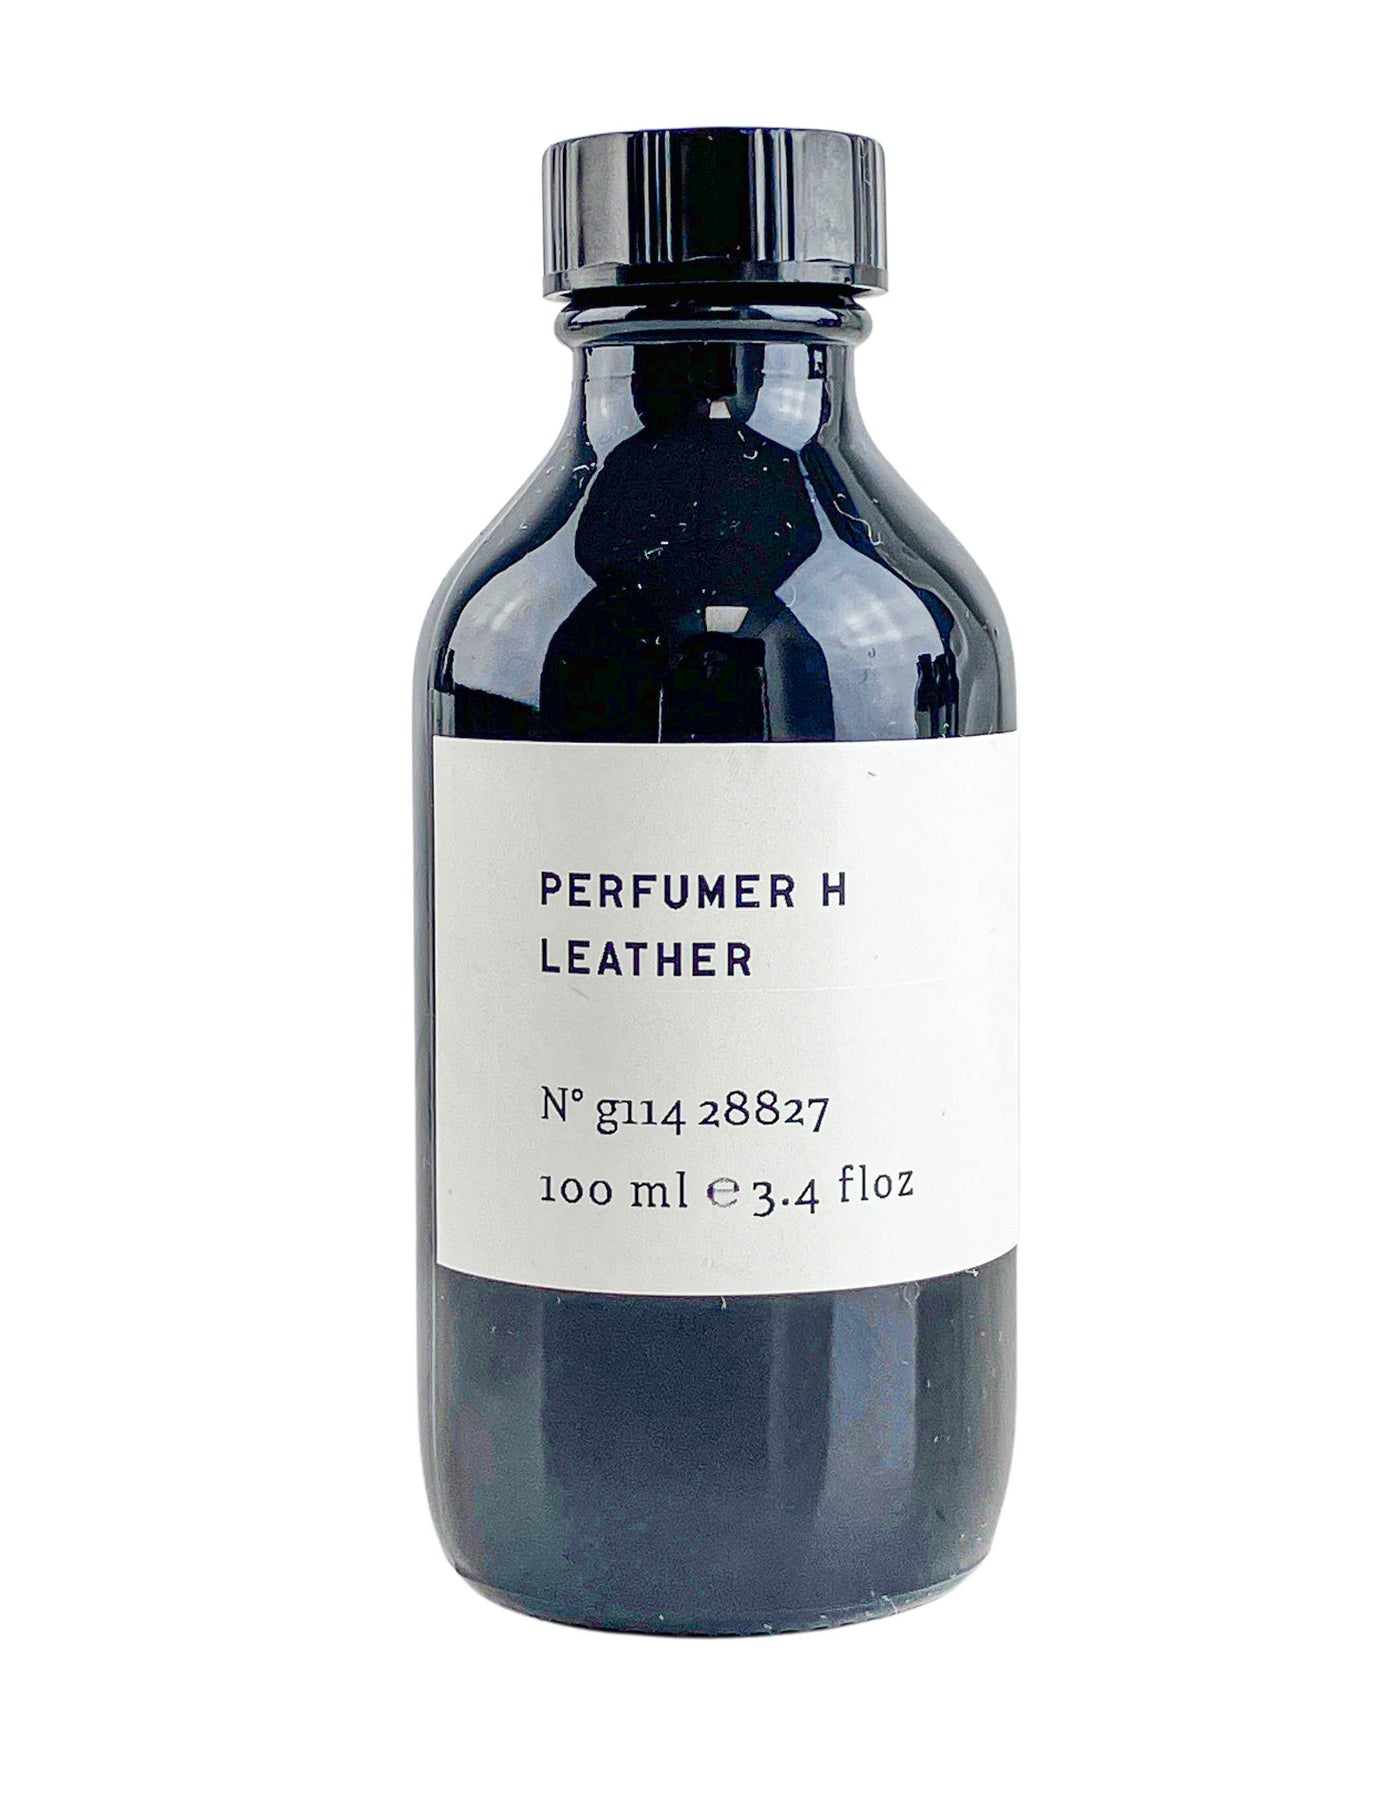 Perfumer H Leather Perfume Refill  and Travel Kit - 100ml - Discounts on Perfumer H at UAL